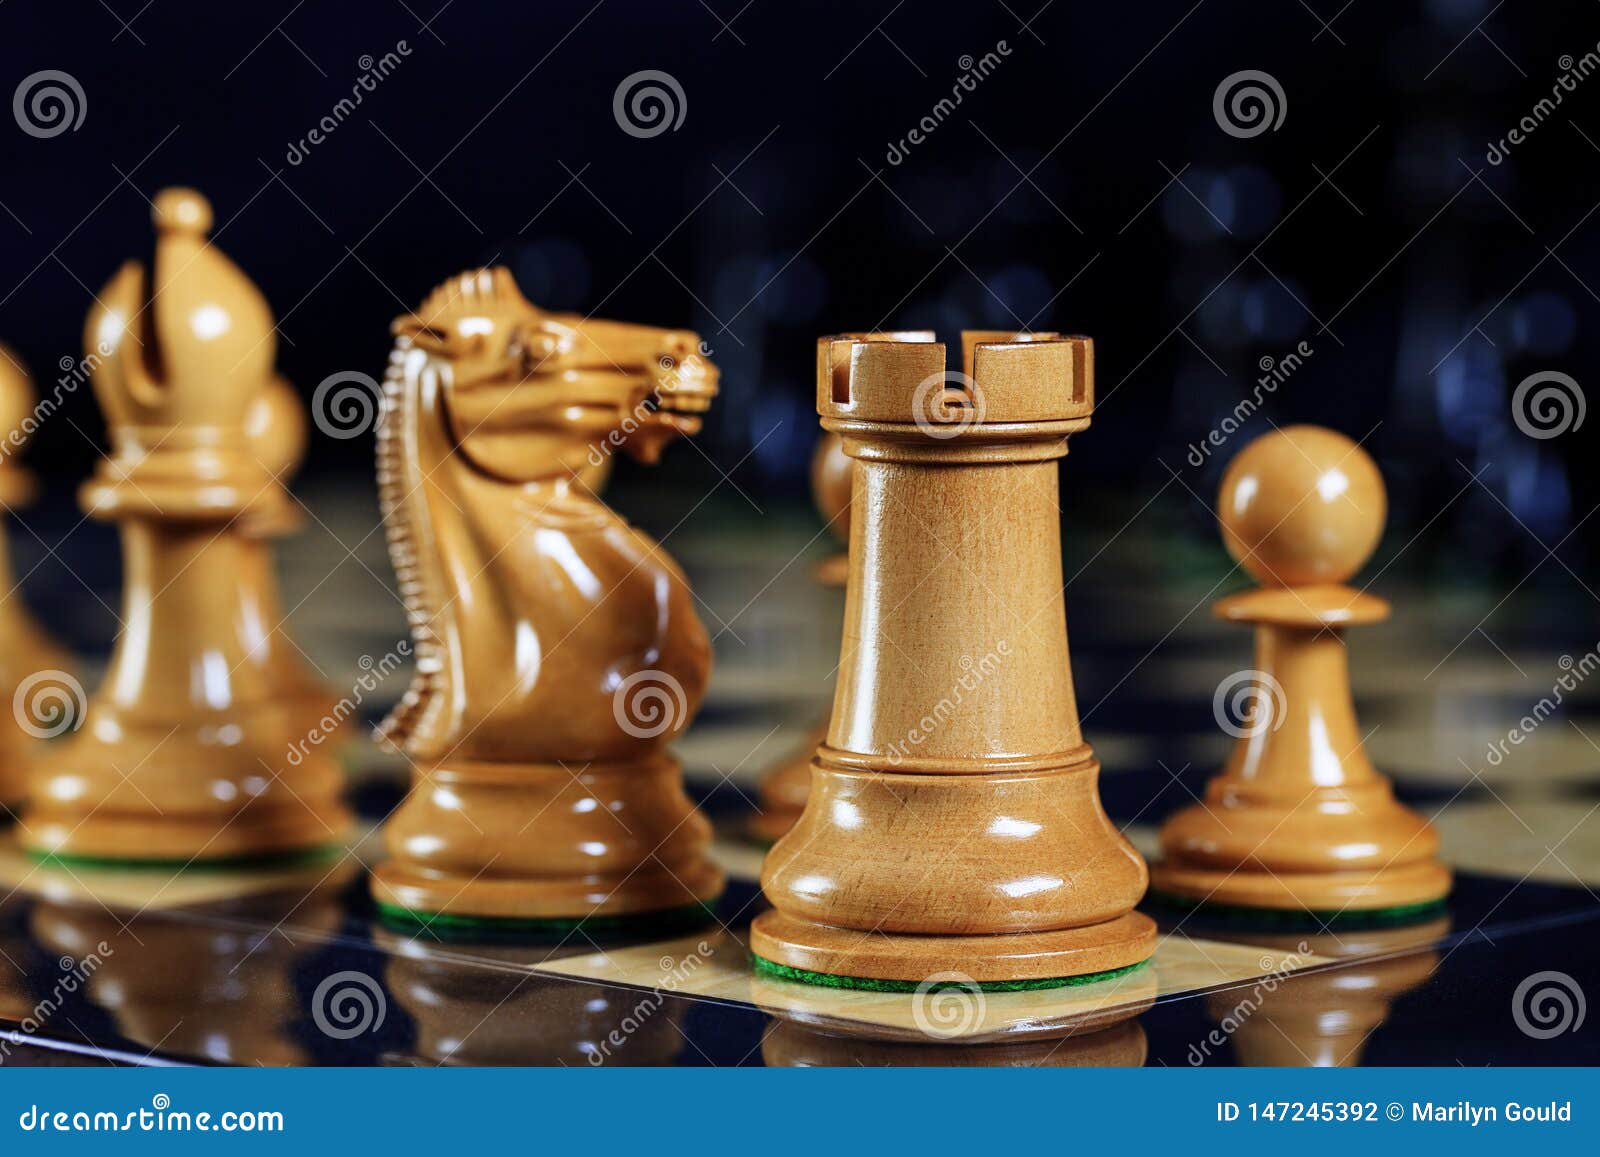 chess pieces rook, knight, bishop and pawn on chess board